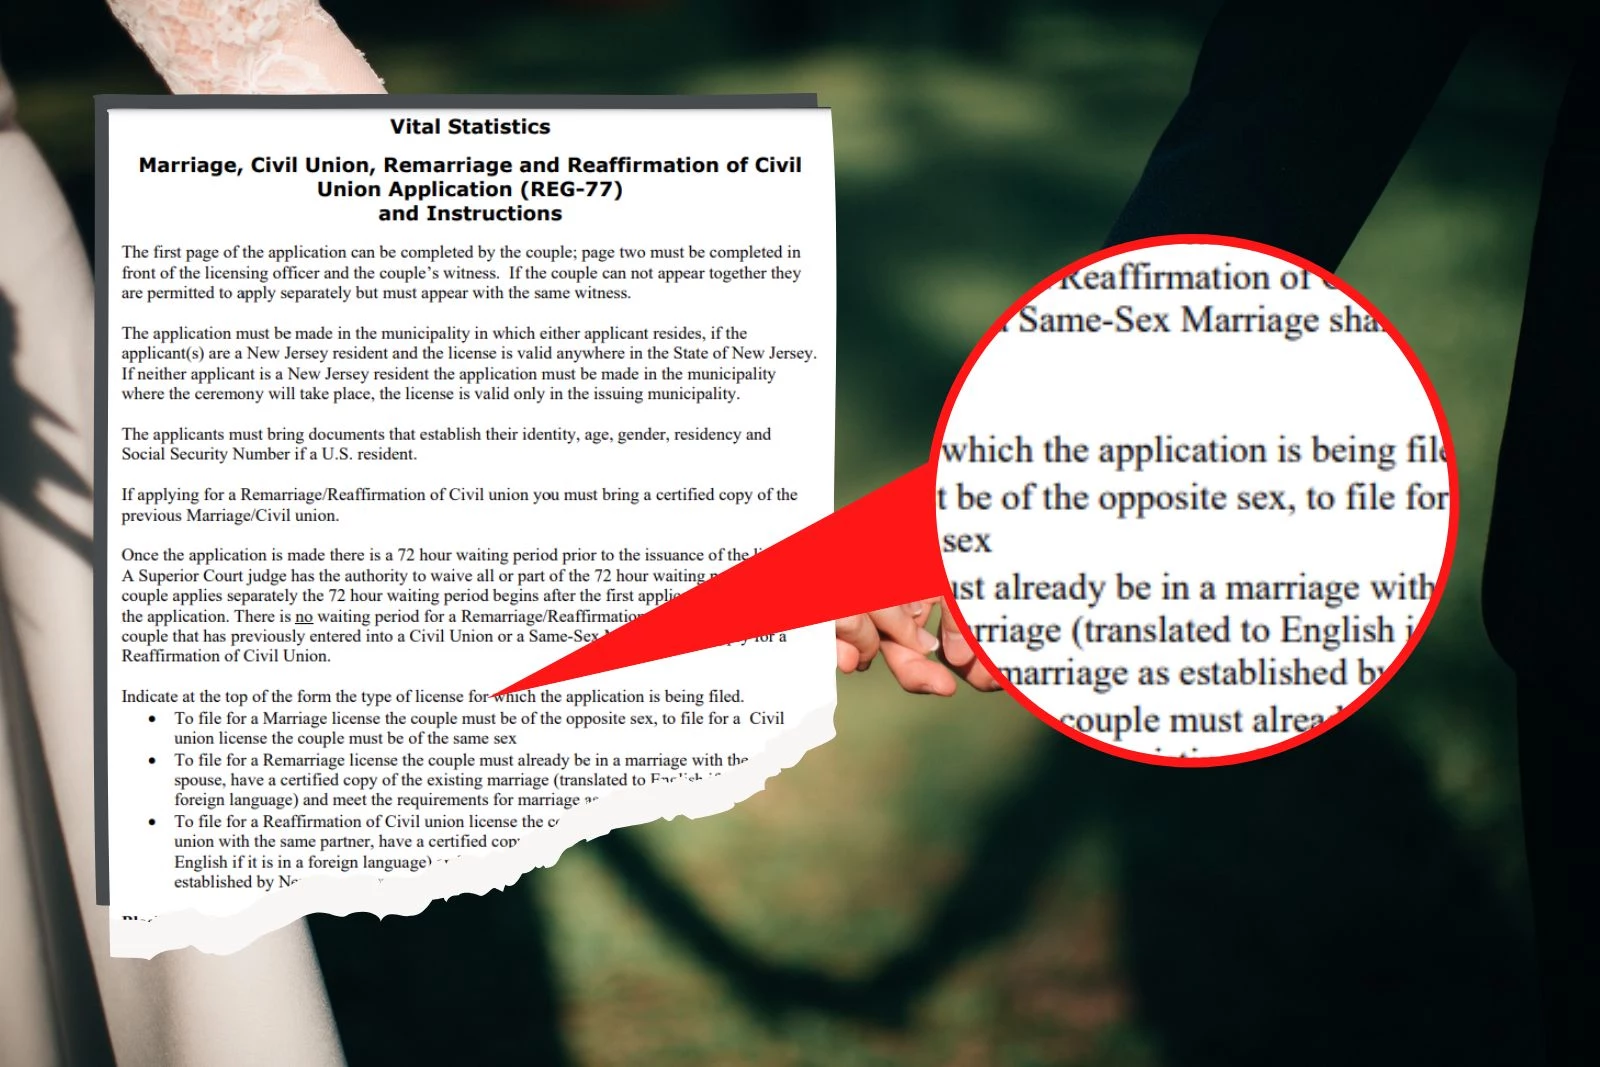 NJ accuses 5 towns of violating law regarding same-sex marriage picture